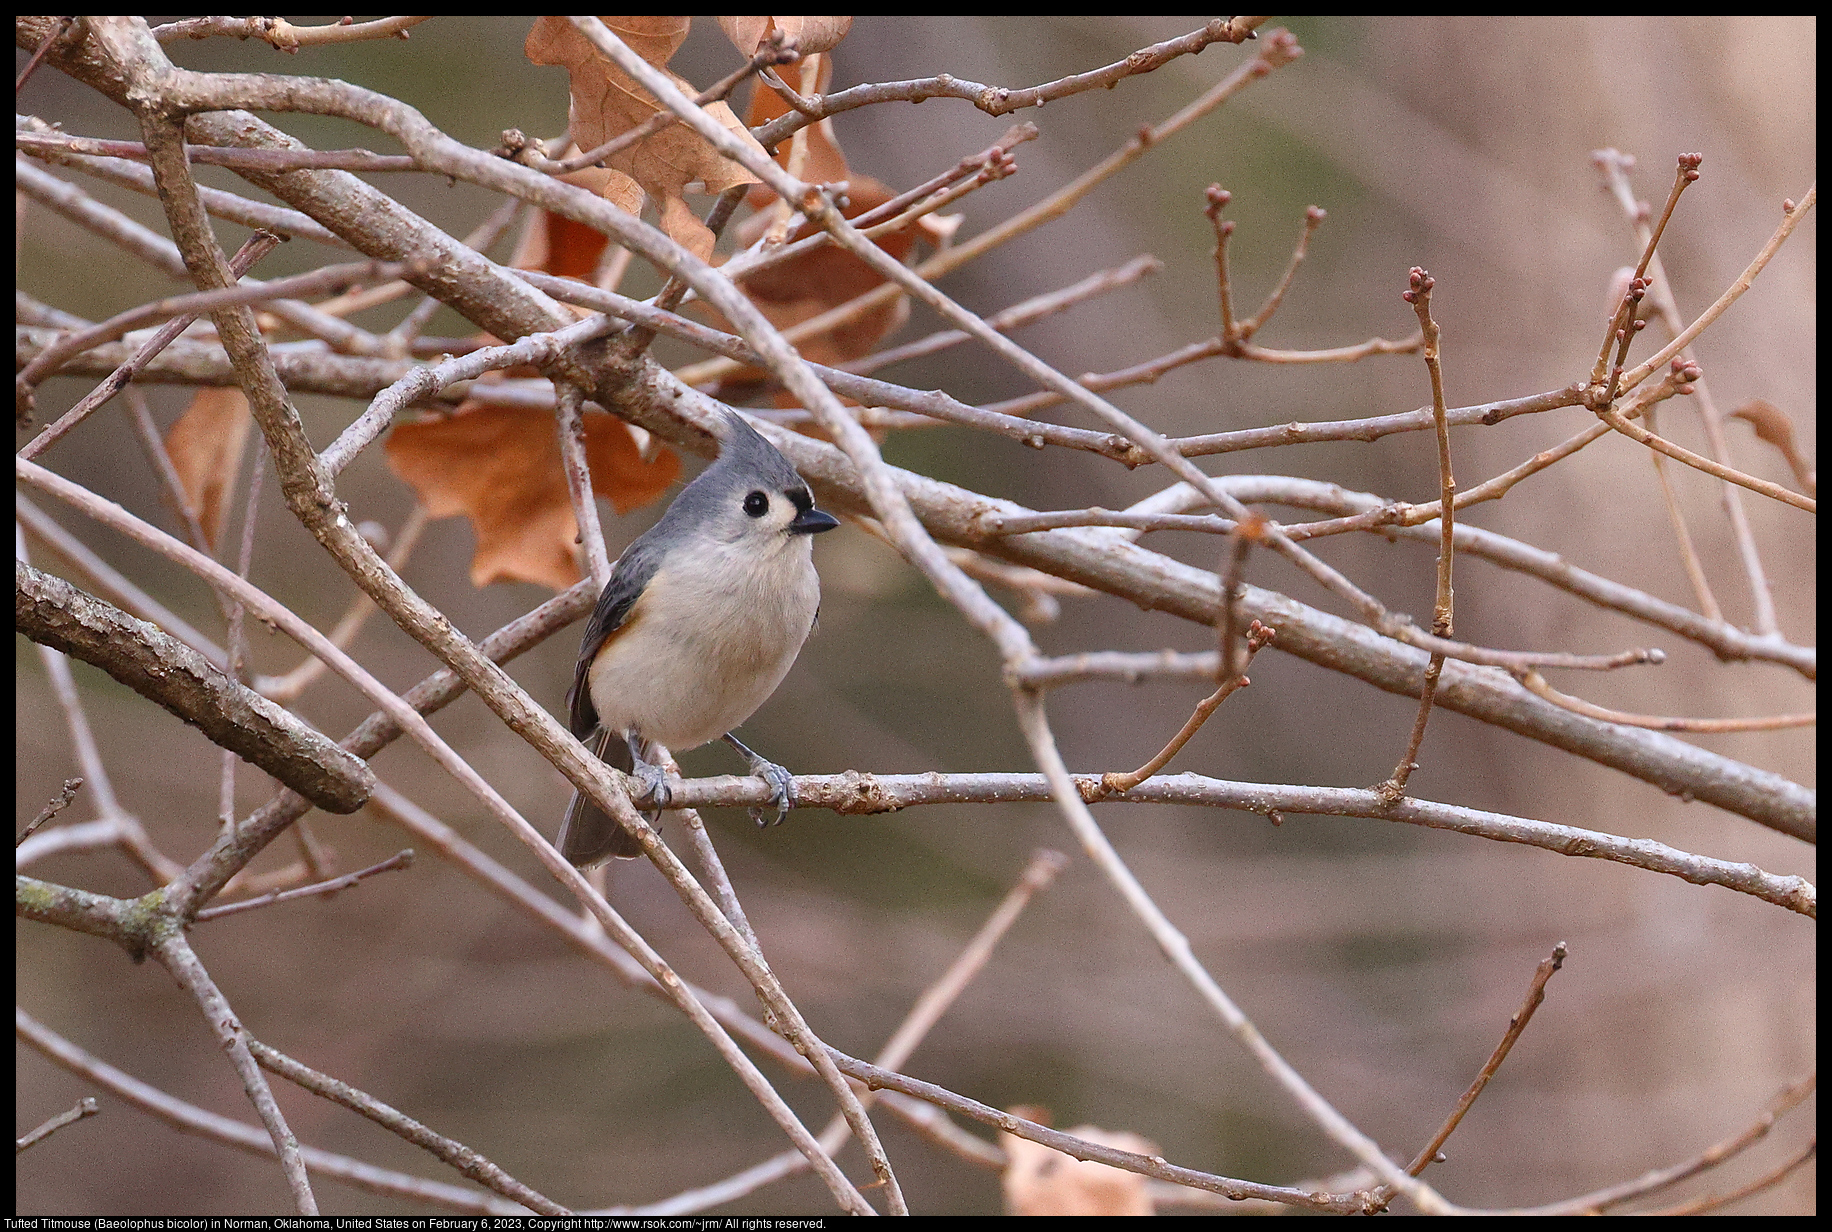 Tufted Titmouse (Baeolophus bicolor) in Norman, Oklahoma, United States on February 6, 2023